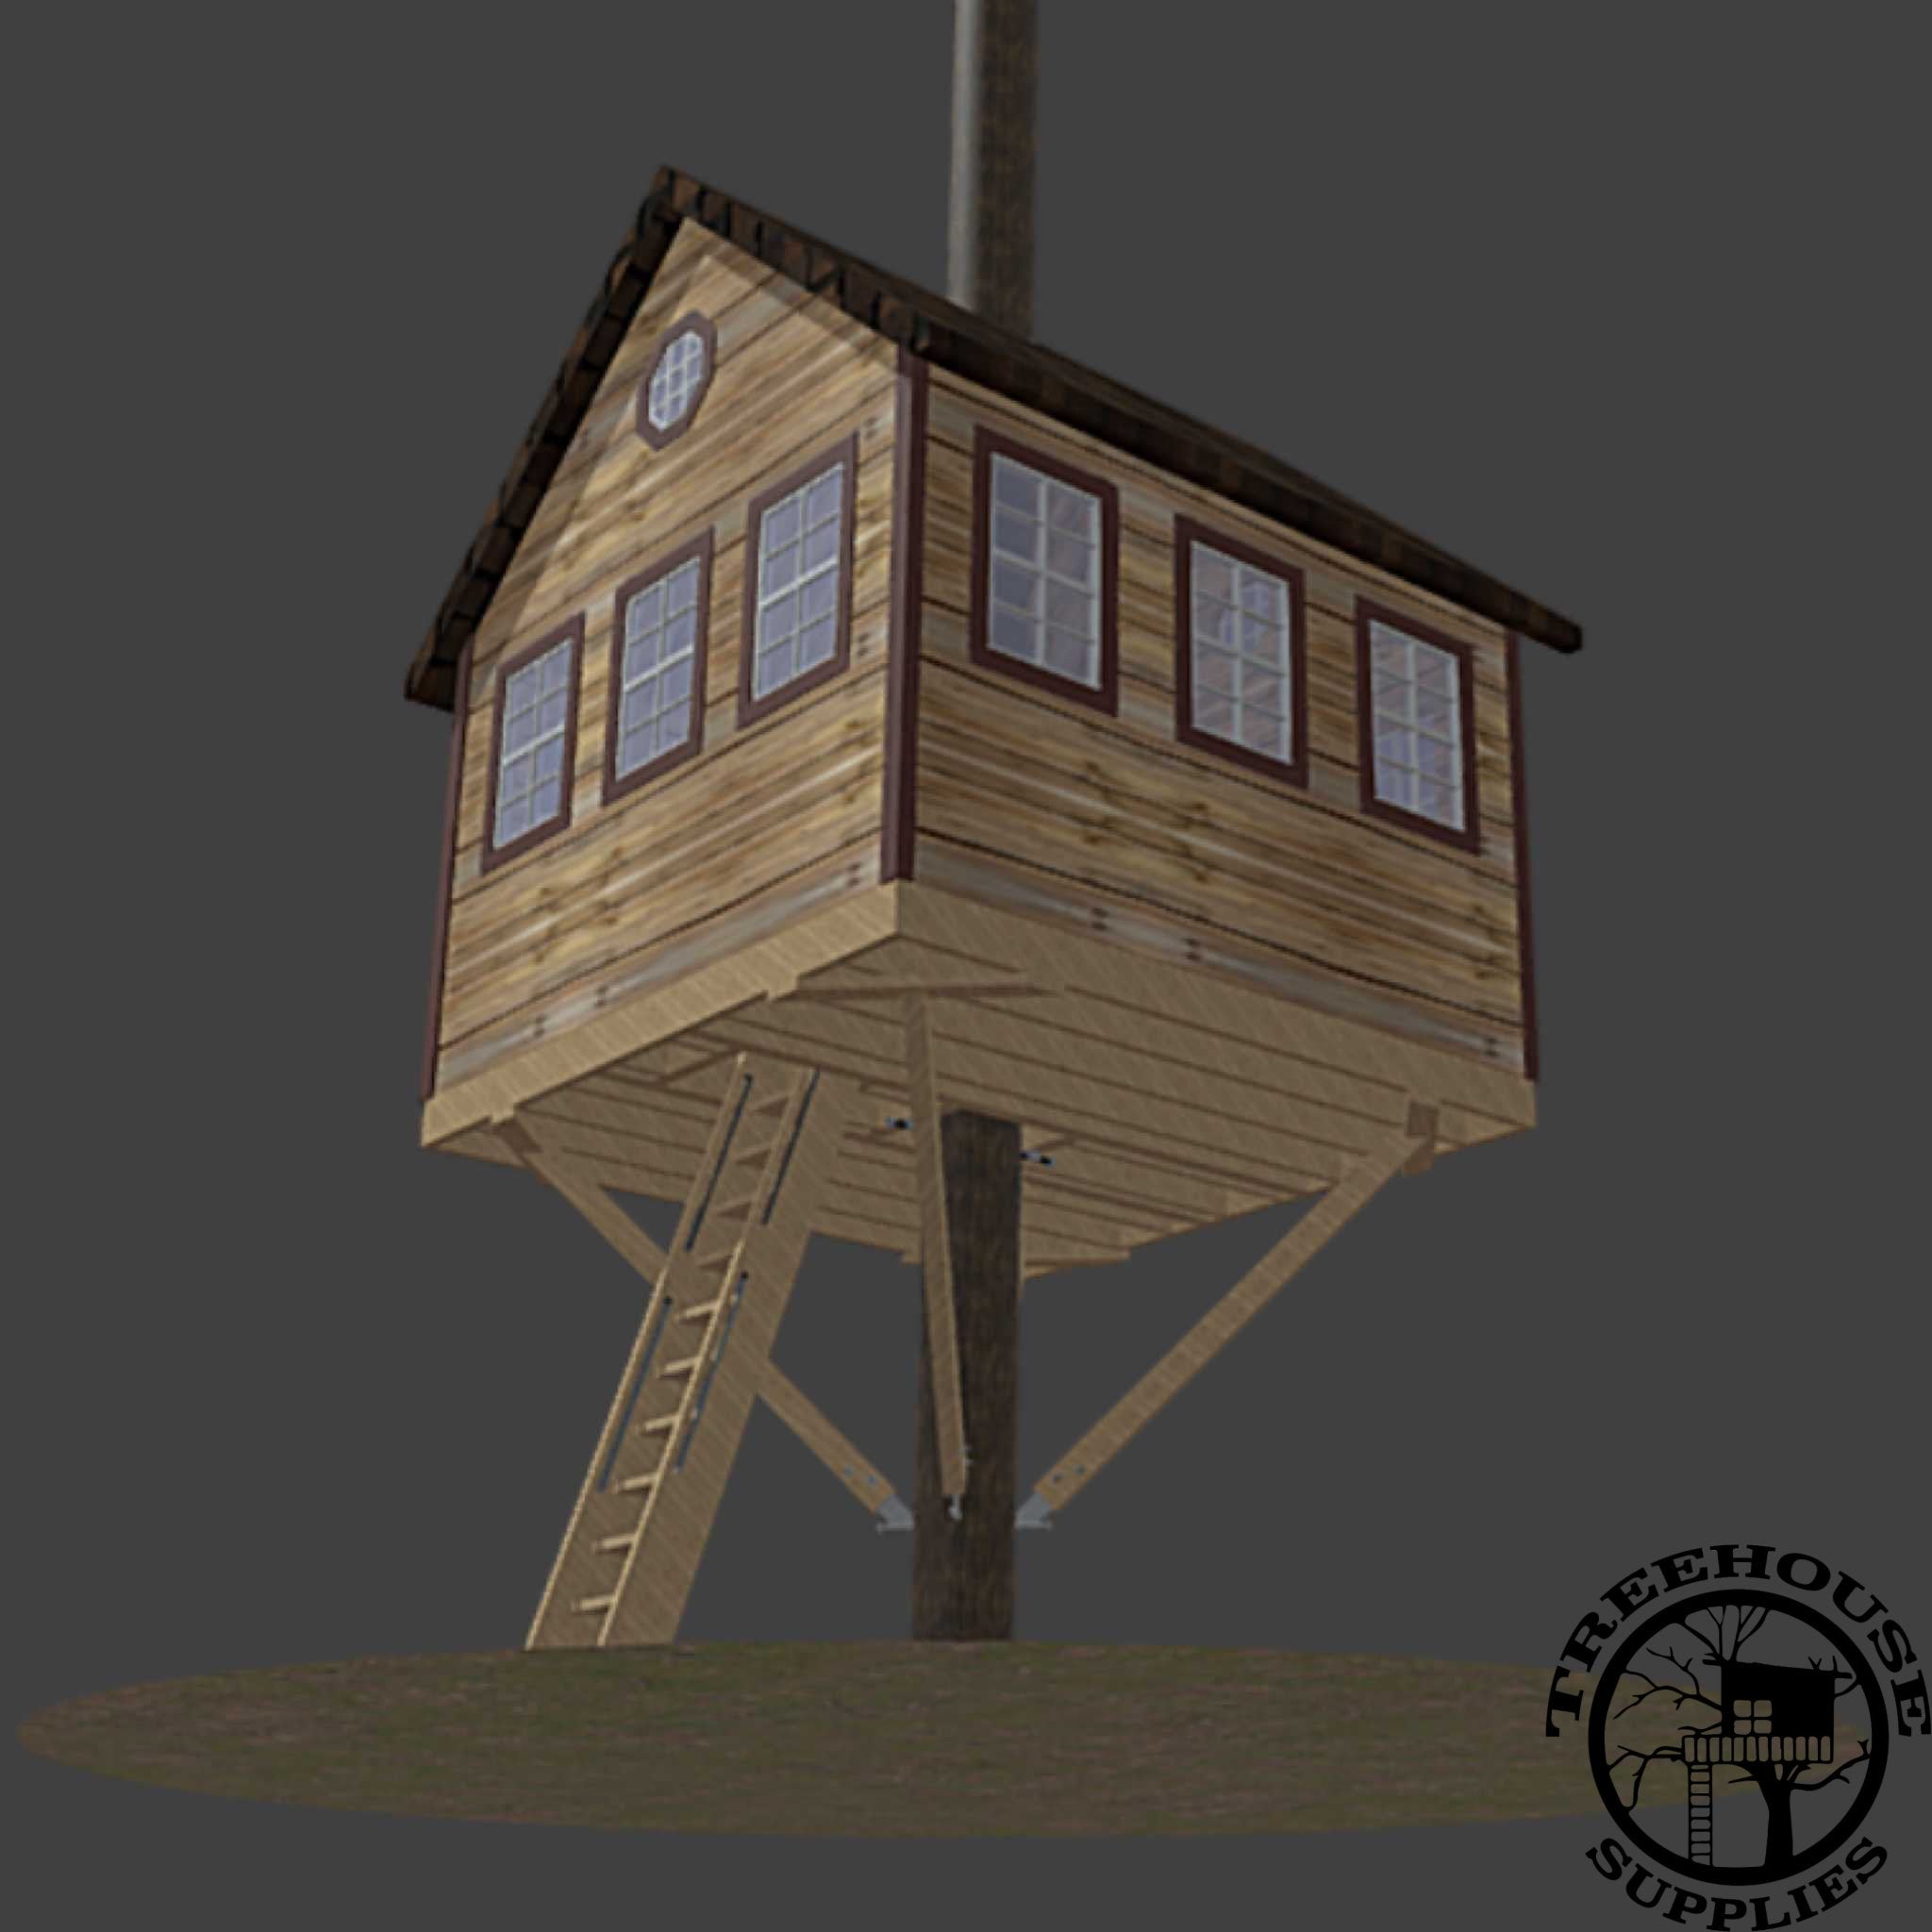 16' SQUARE TREEHOUSE PLAN - NOW INCLUDES STEP-BY-STEP 3D MODELING!! - Treehouse Supplies